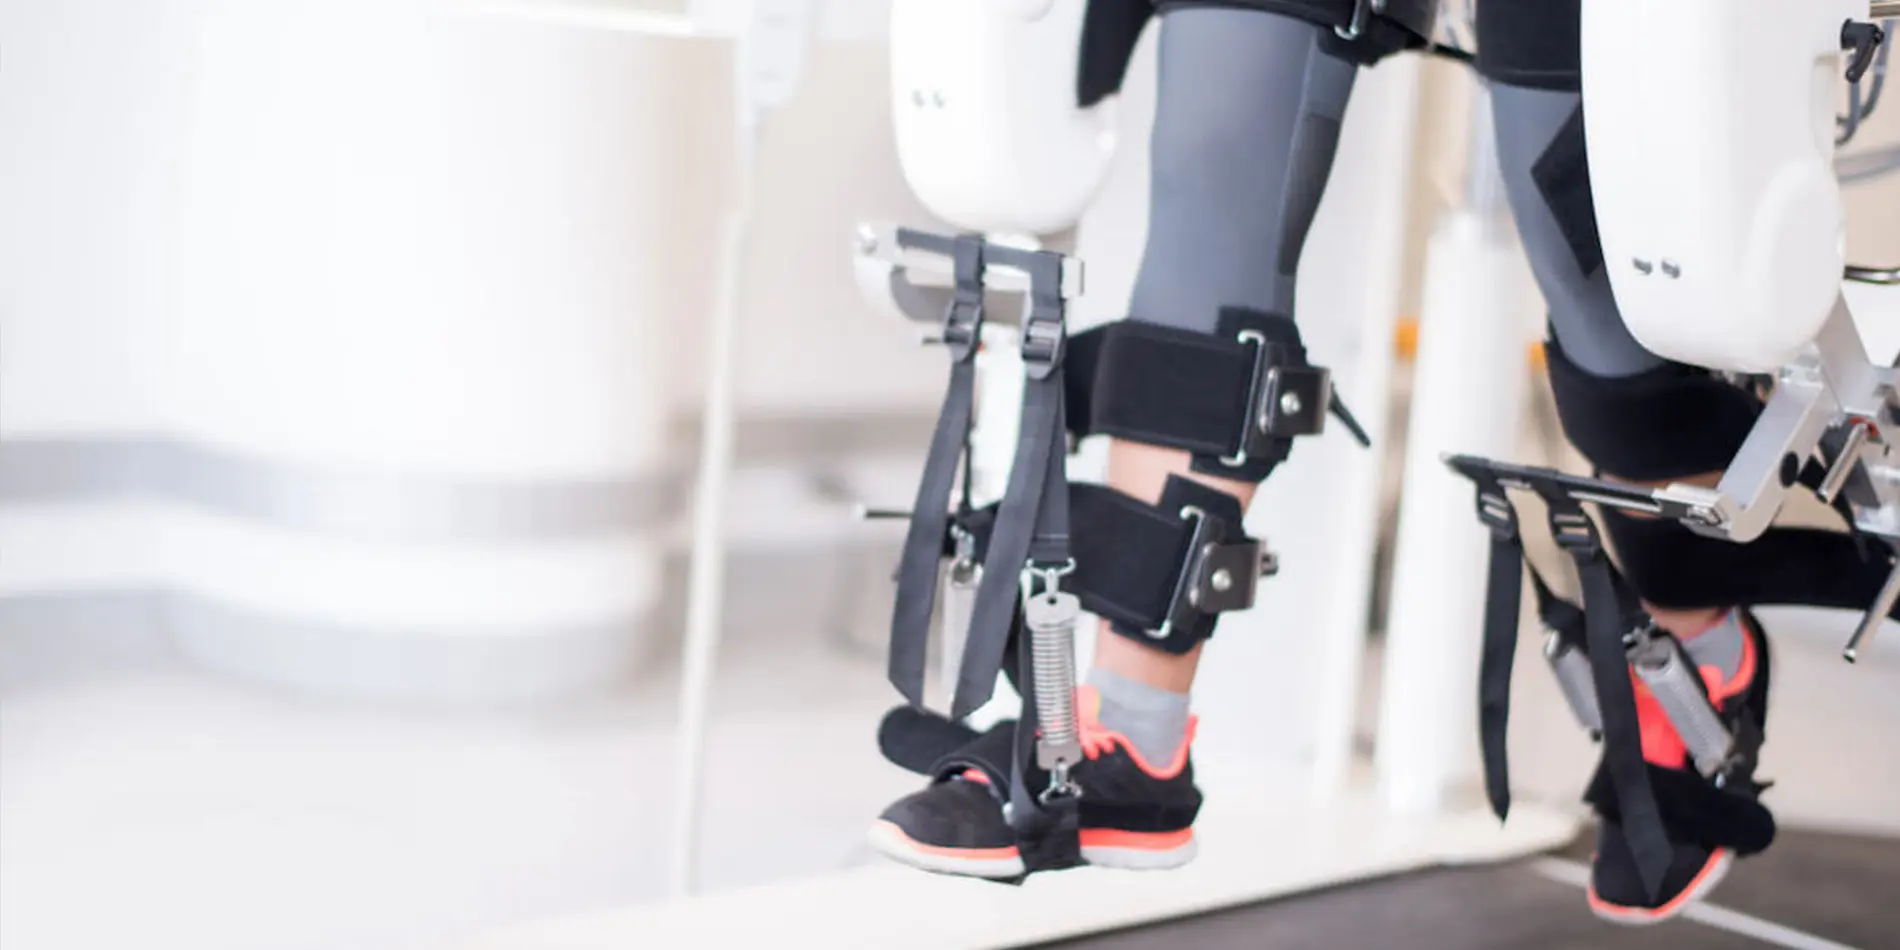 A person's legs are shown with an exoskeleton attached to them.